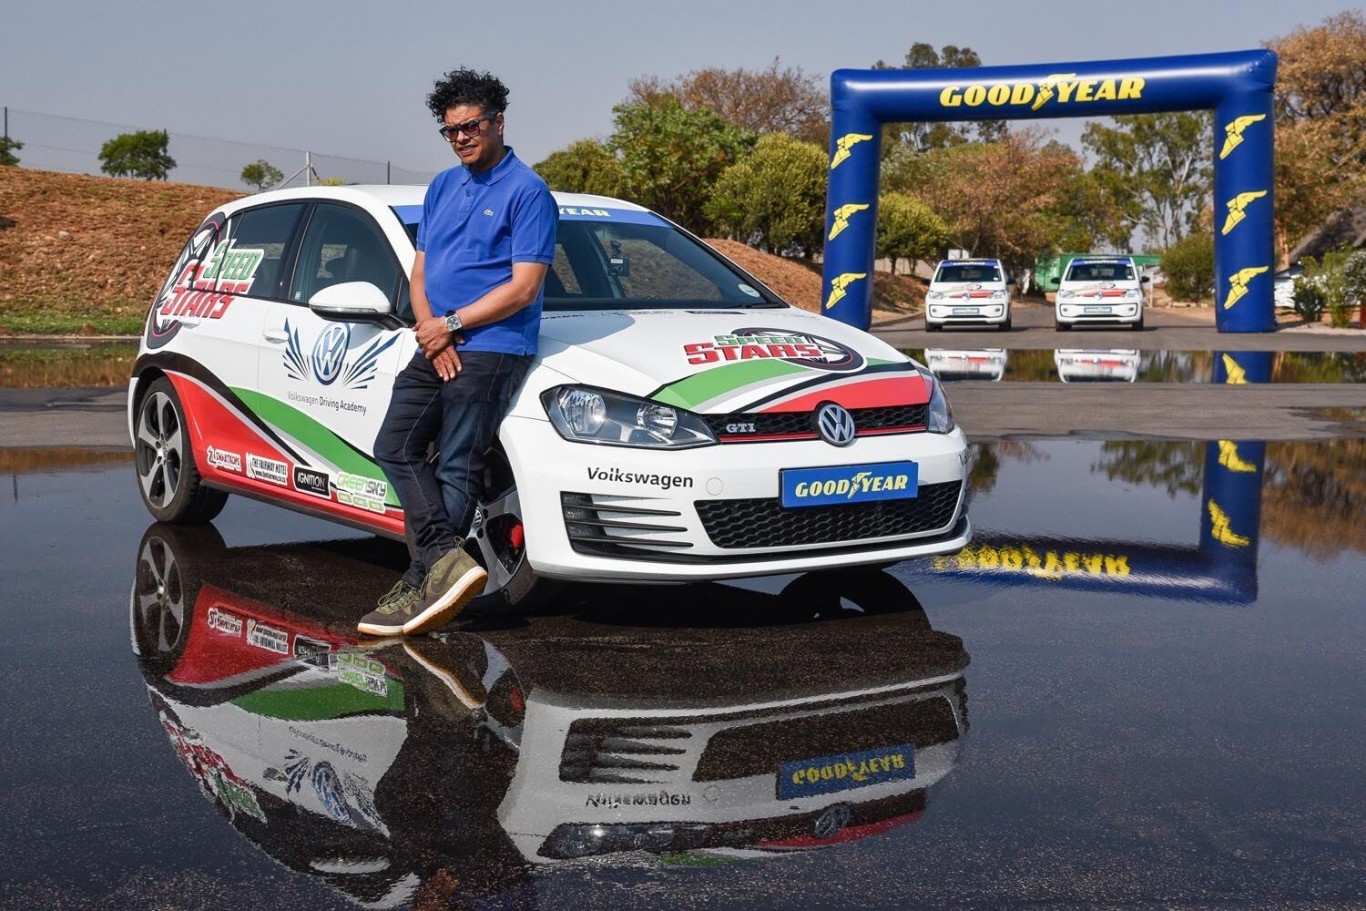 Joey Rasdien and Richelieu Beaunoir takes to the track on Speed Stars